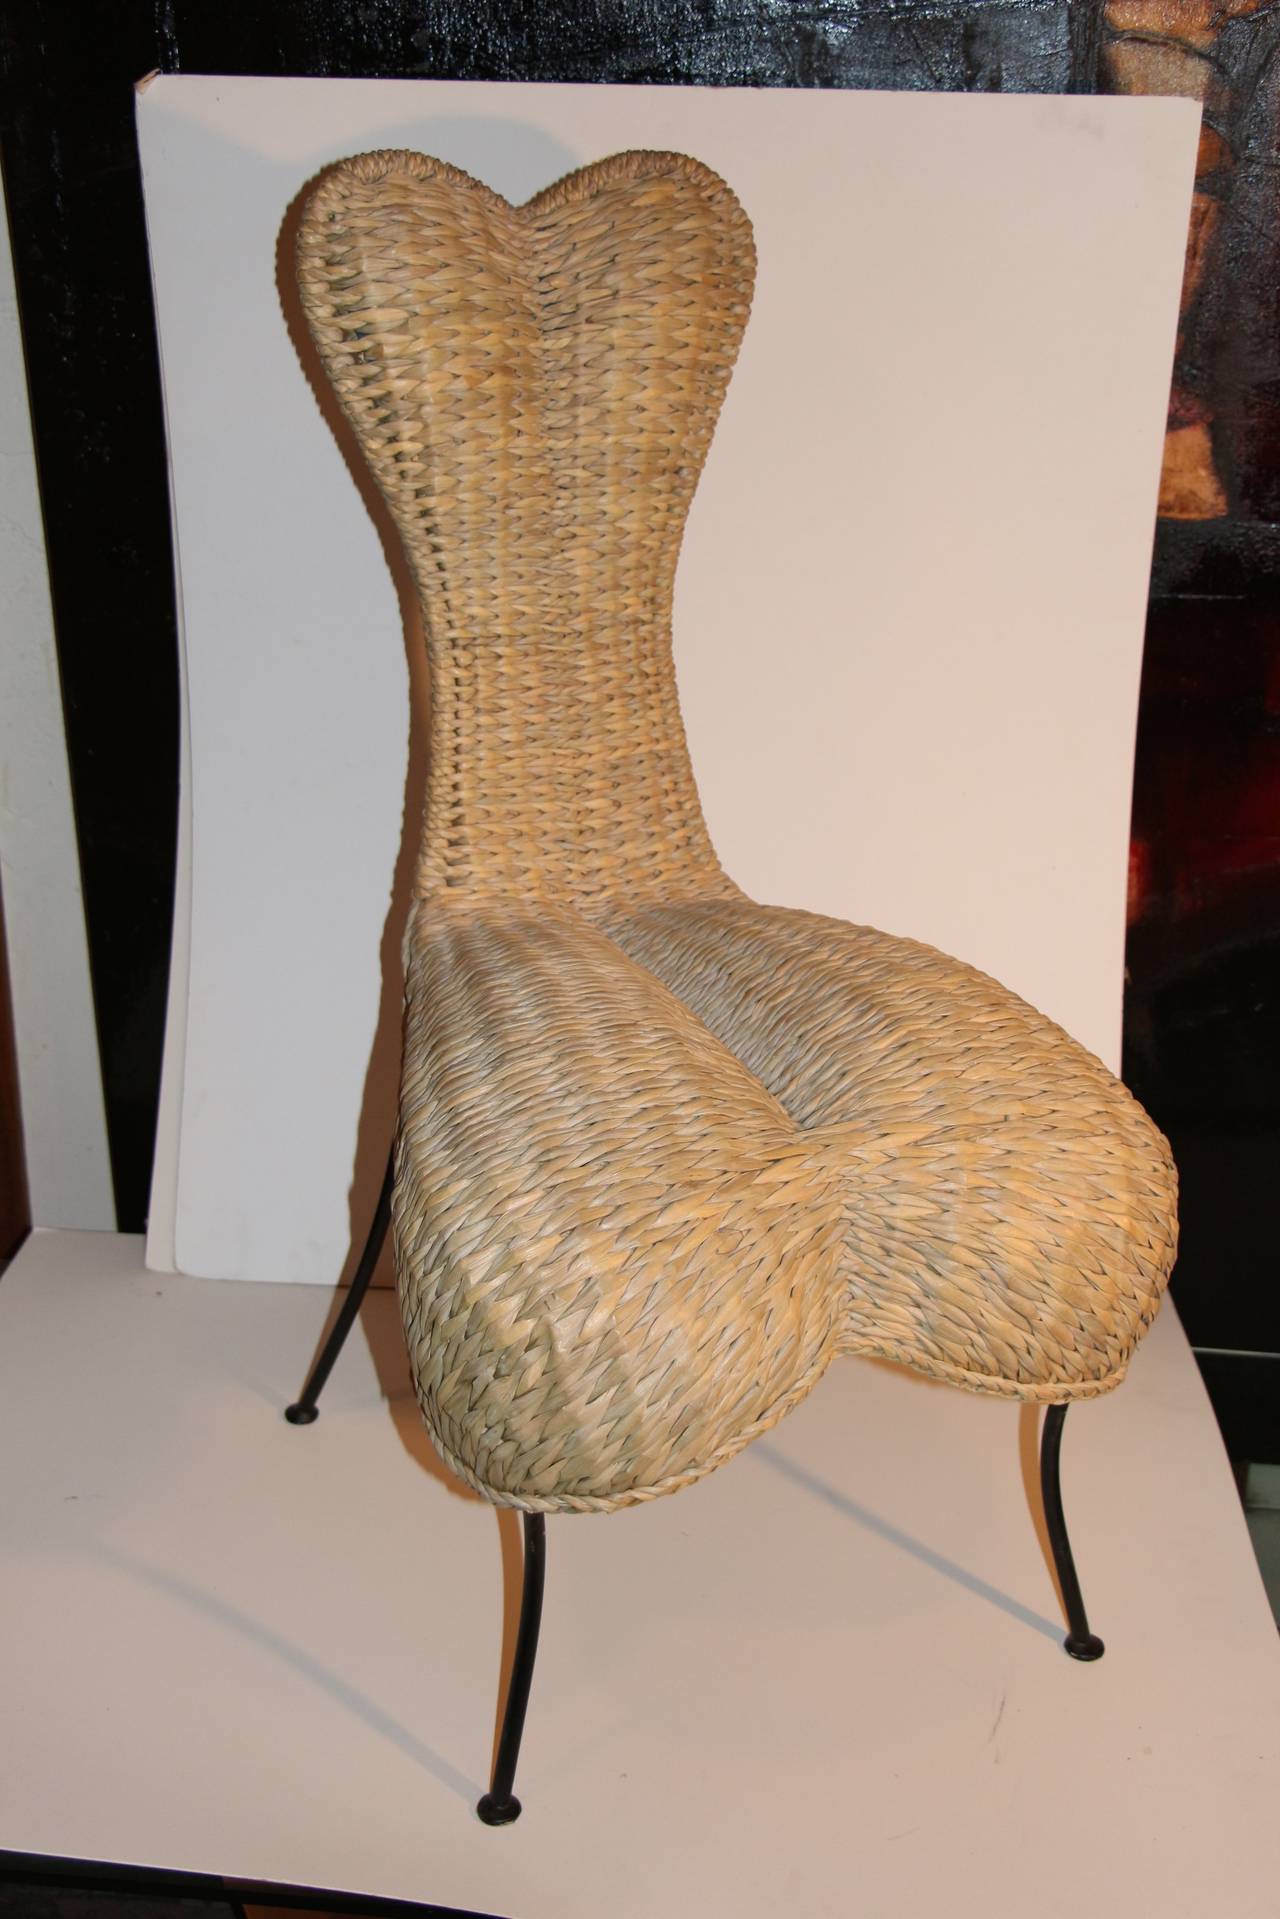 A really unique woven reed or rush chair in the shape of a heart. Looks very much in the vein of Tom Dixon's woven chairs or Marc Newson's. This chair may be a prototype as it appears to be hand finished underneath. In any event a most unusual